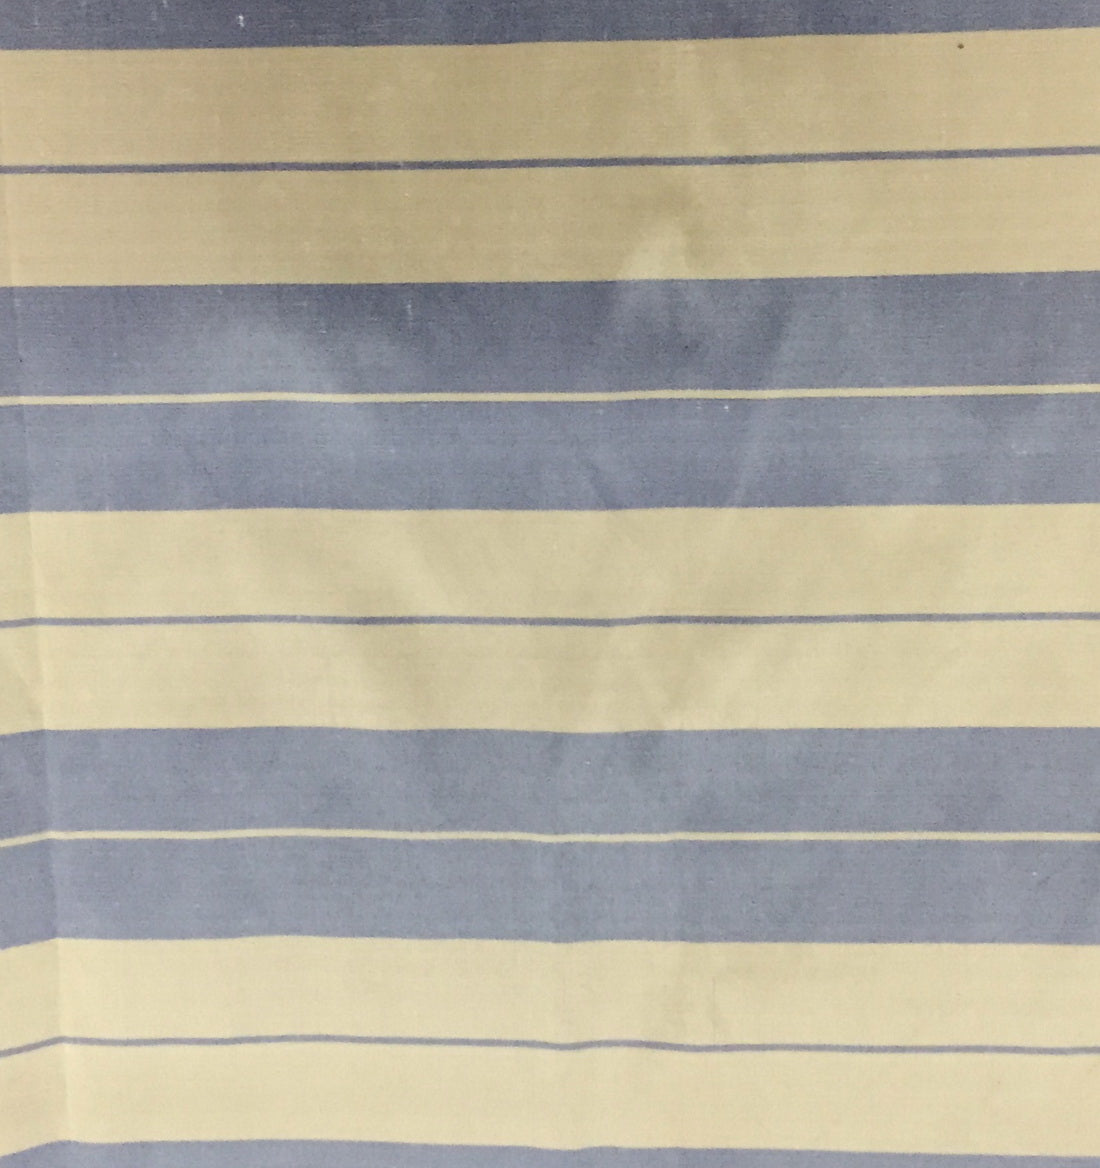 100% Pure Silk dupion cloudy blue and beige stripe Fabric 54" wide DUPS69[1]